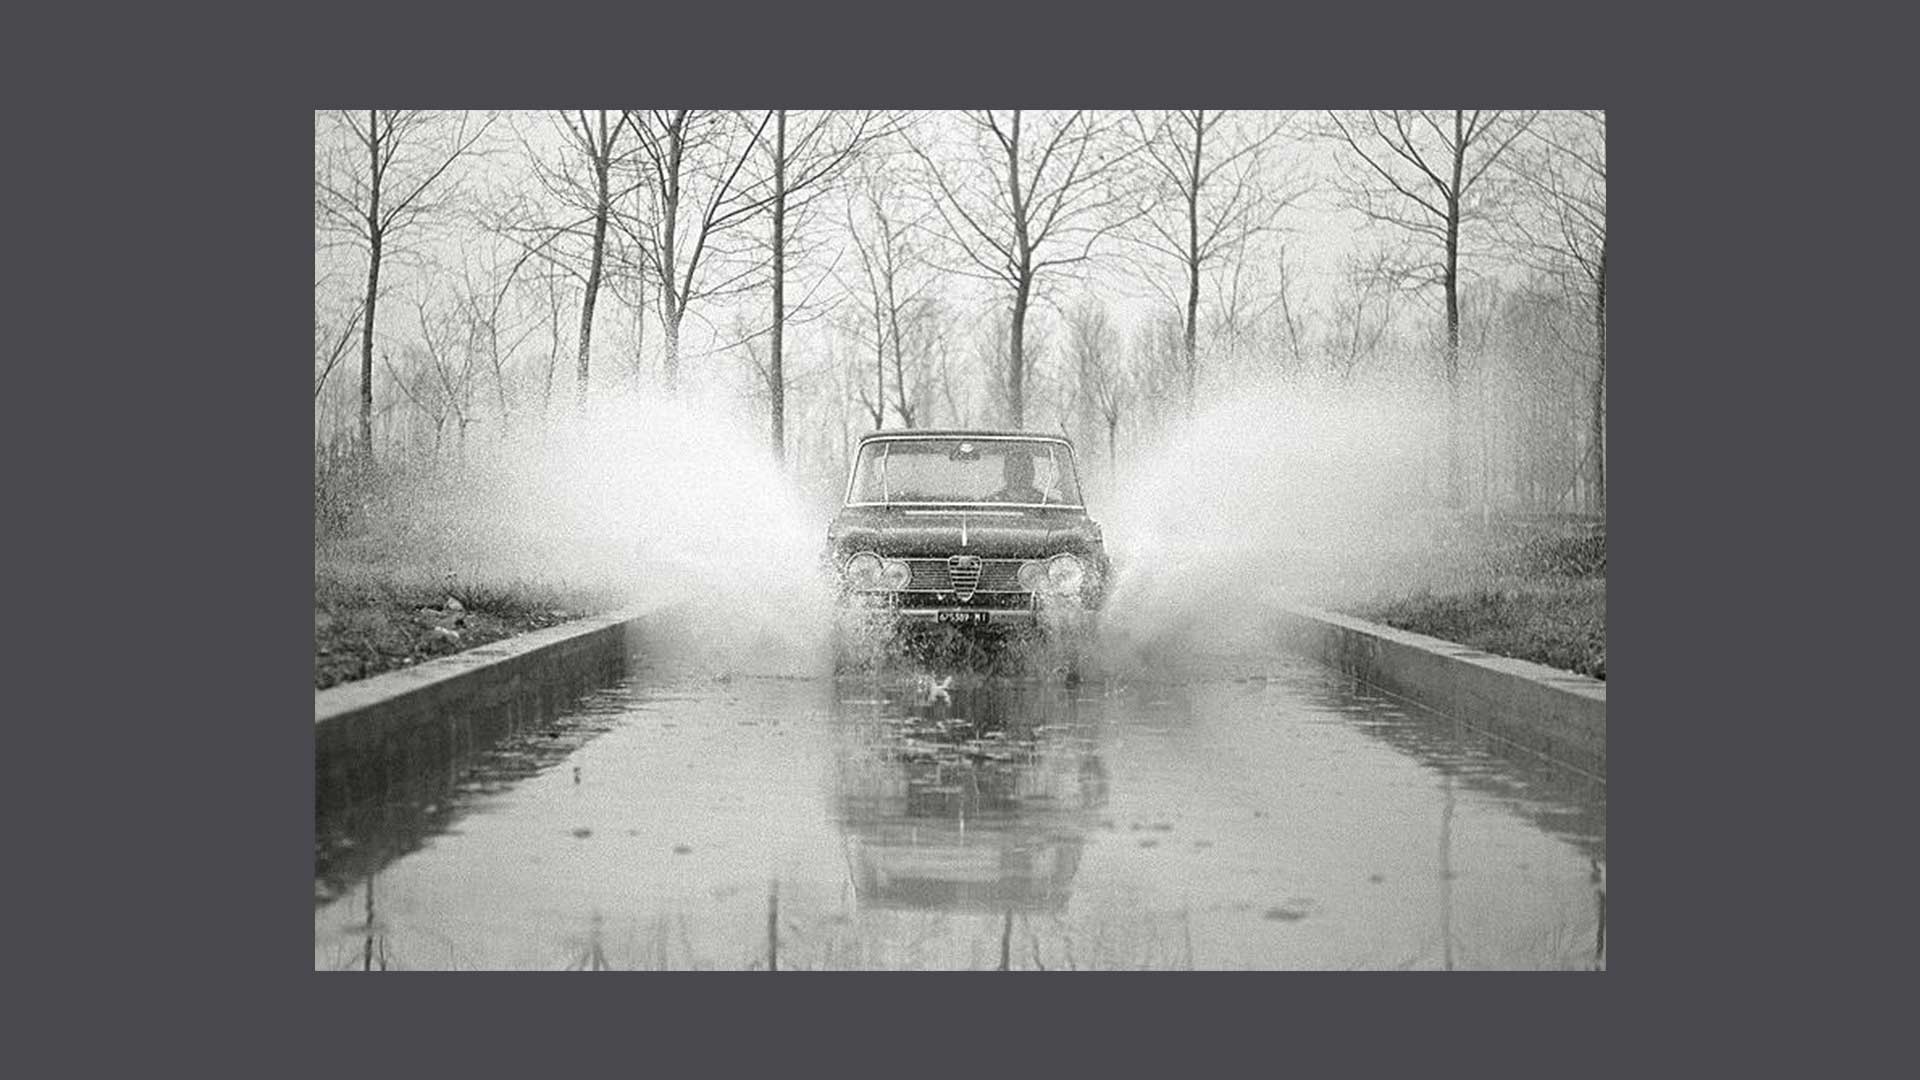 Historic photo of a car on flooded ground